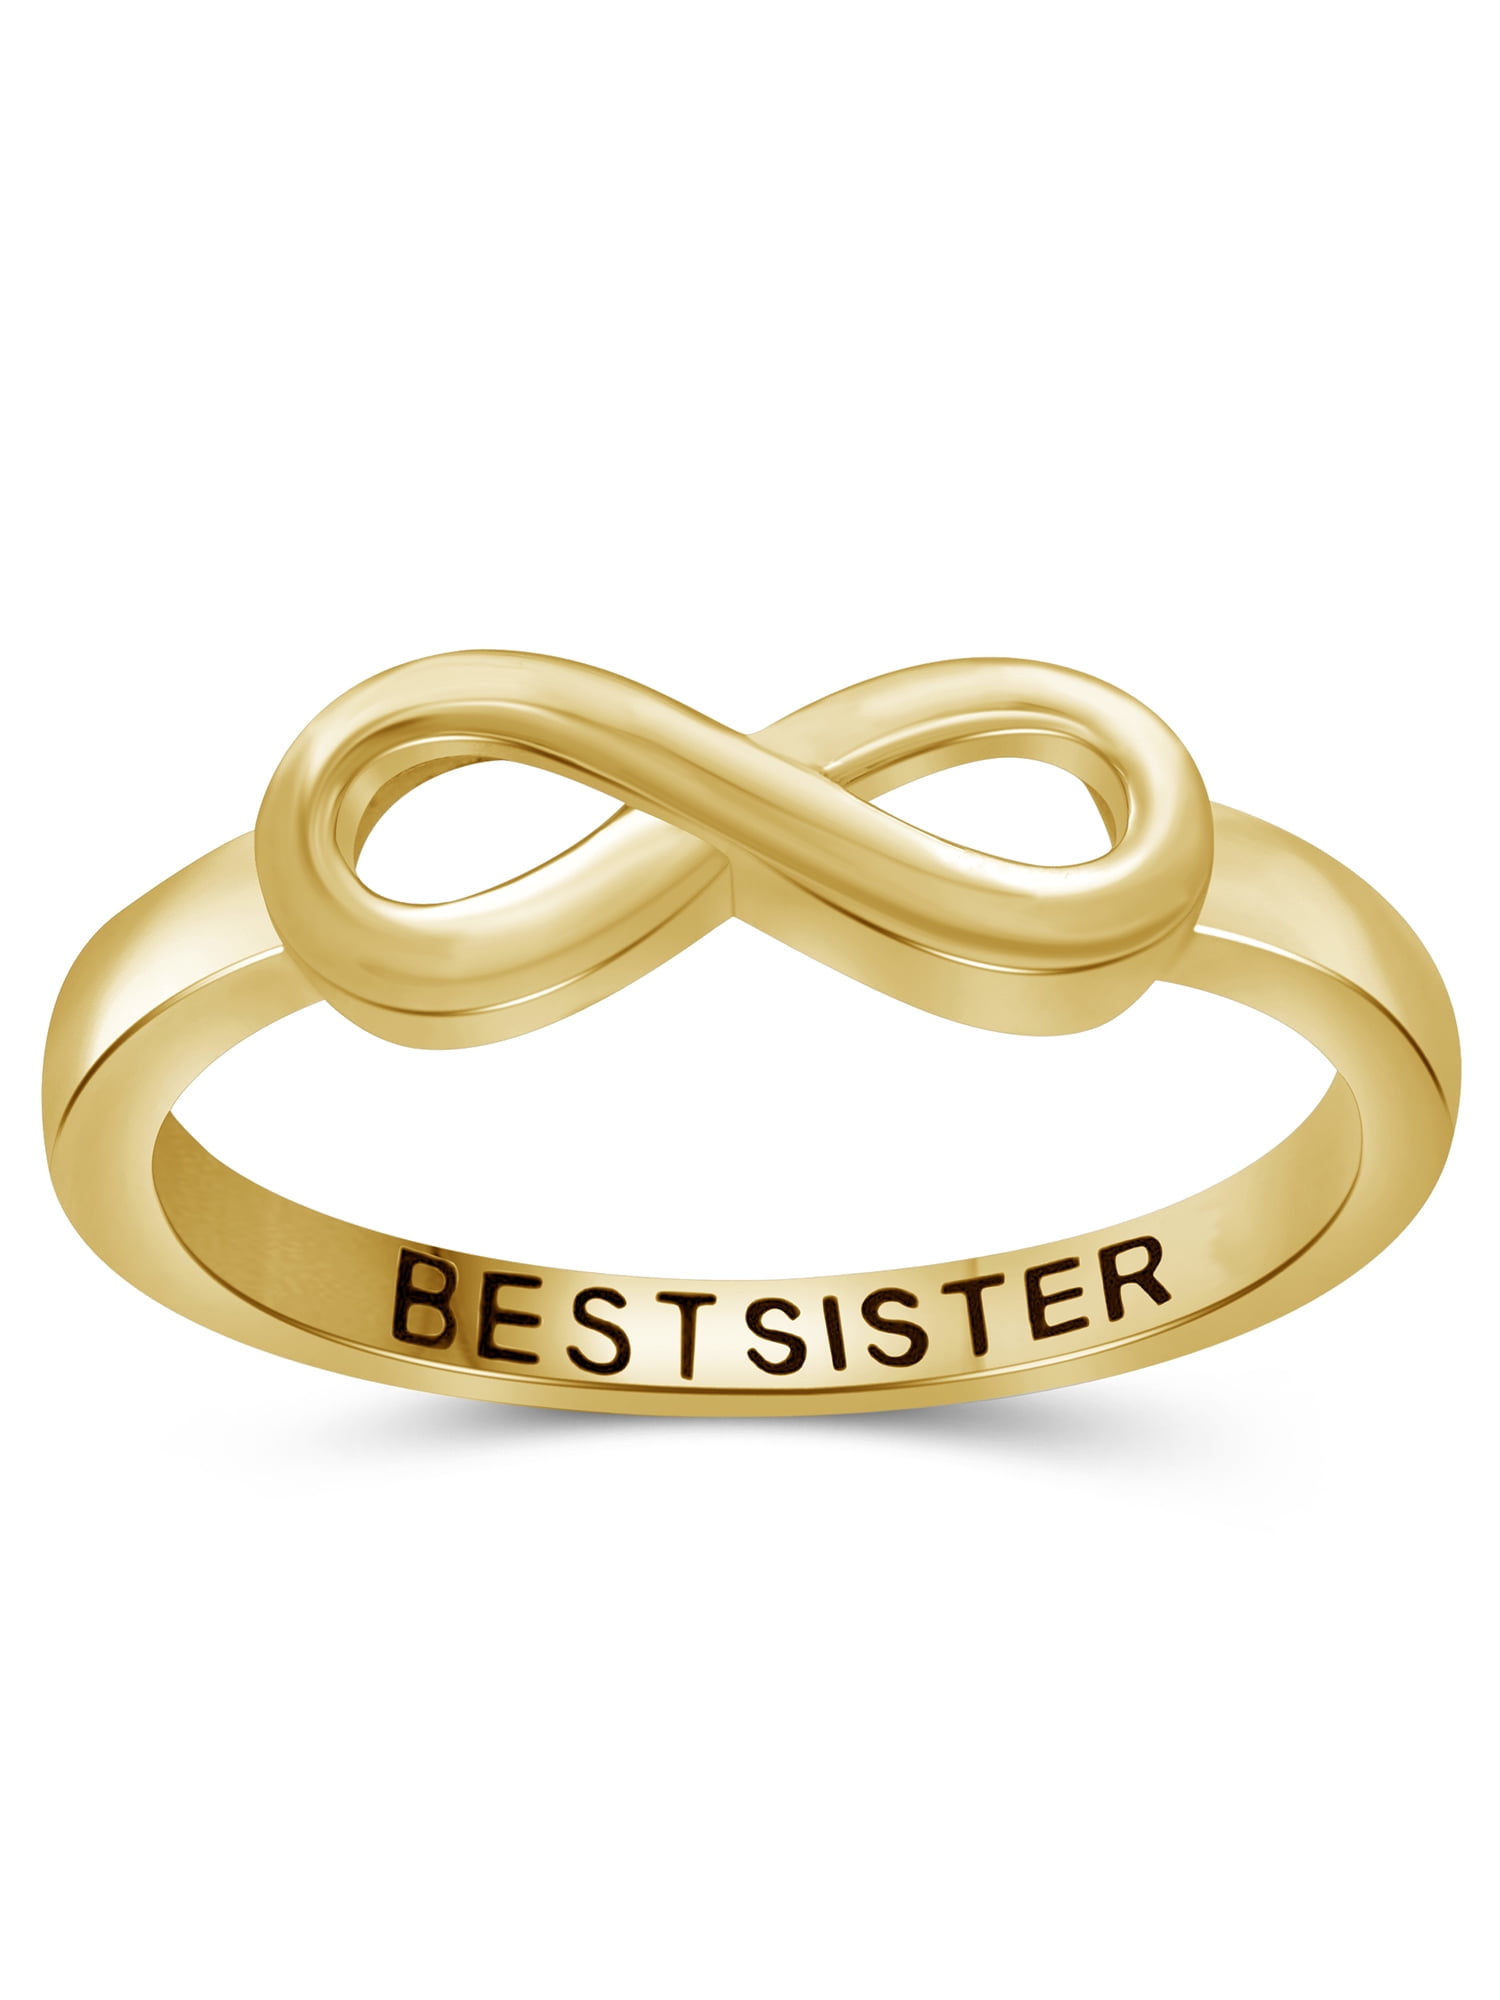 Stunning 14k Yellow Gold Band Infinity Two-Headed Snake Ring